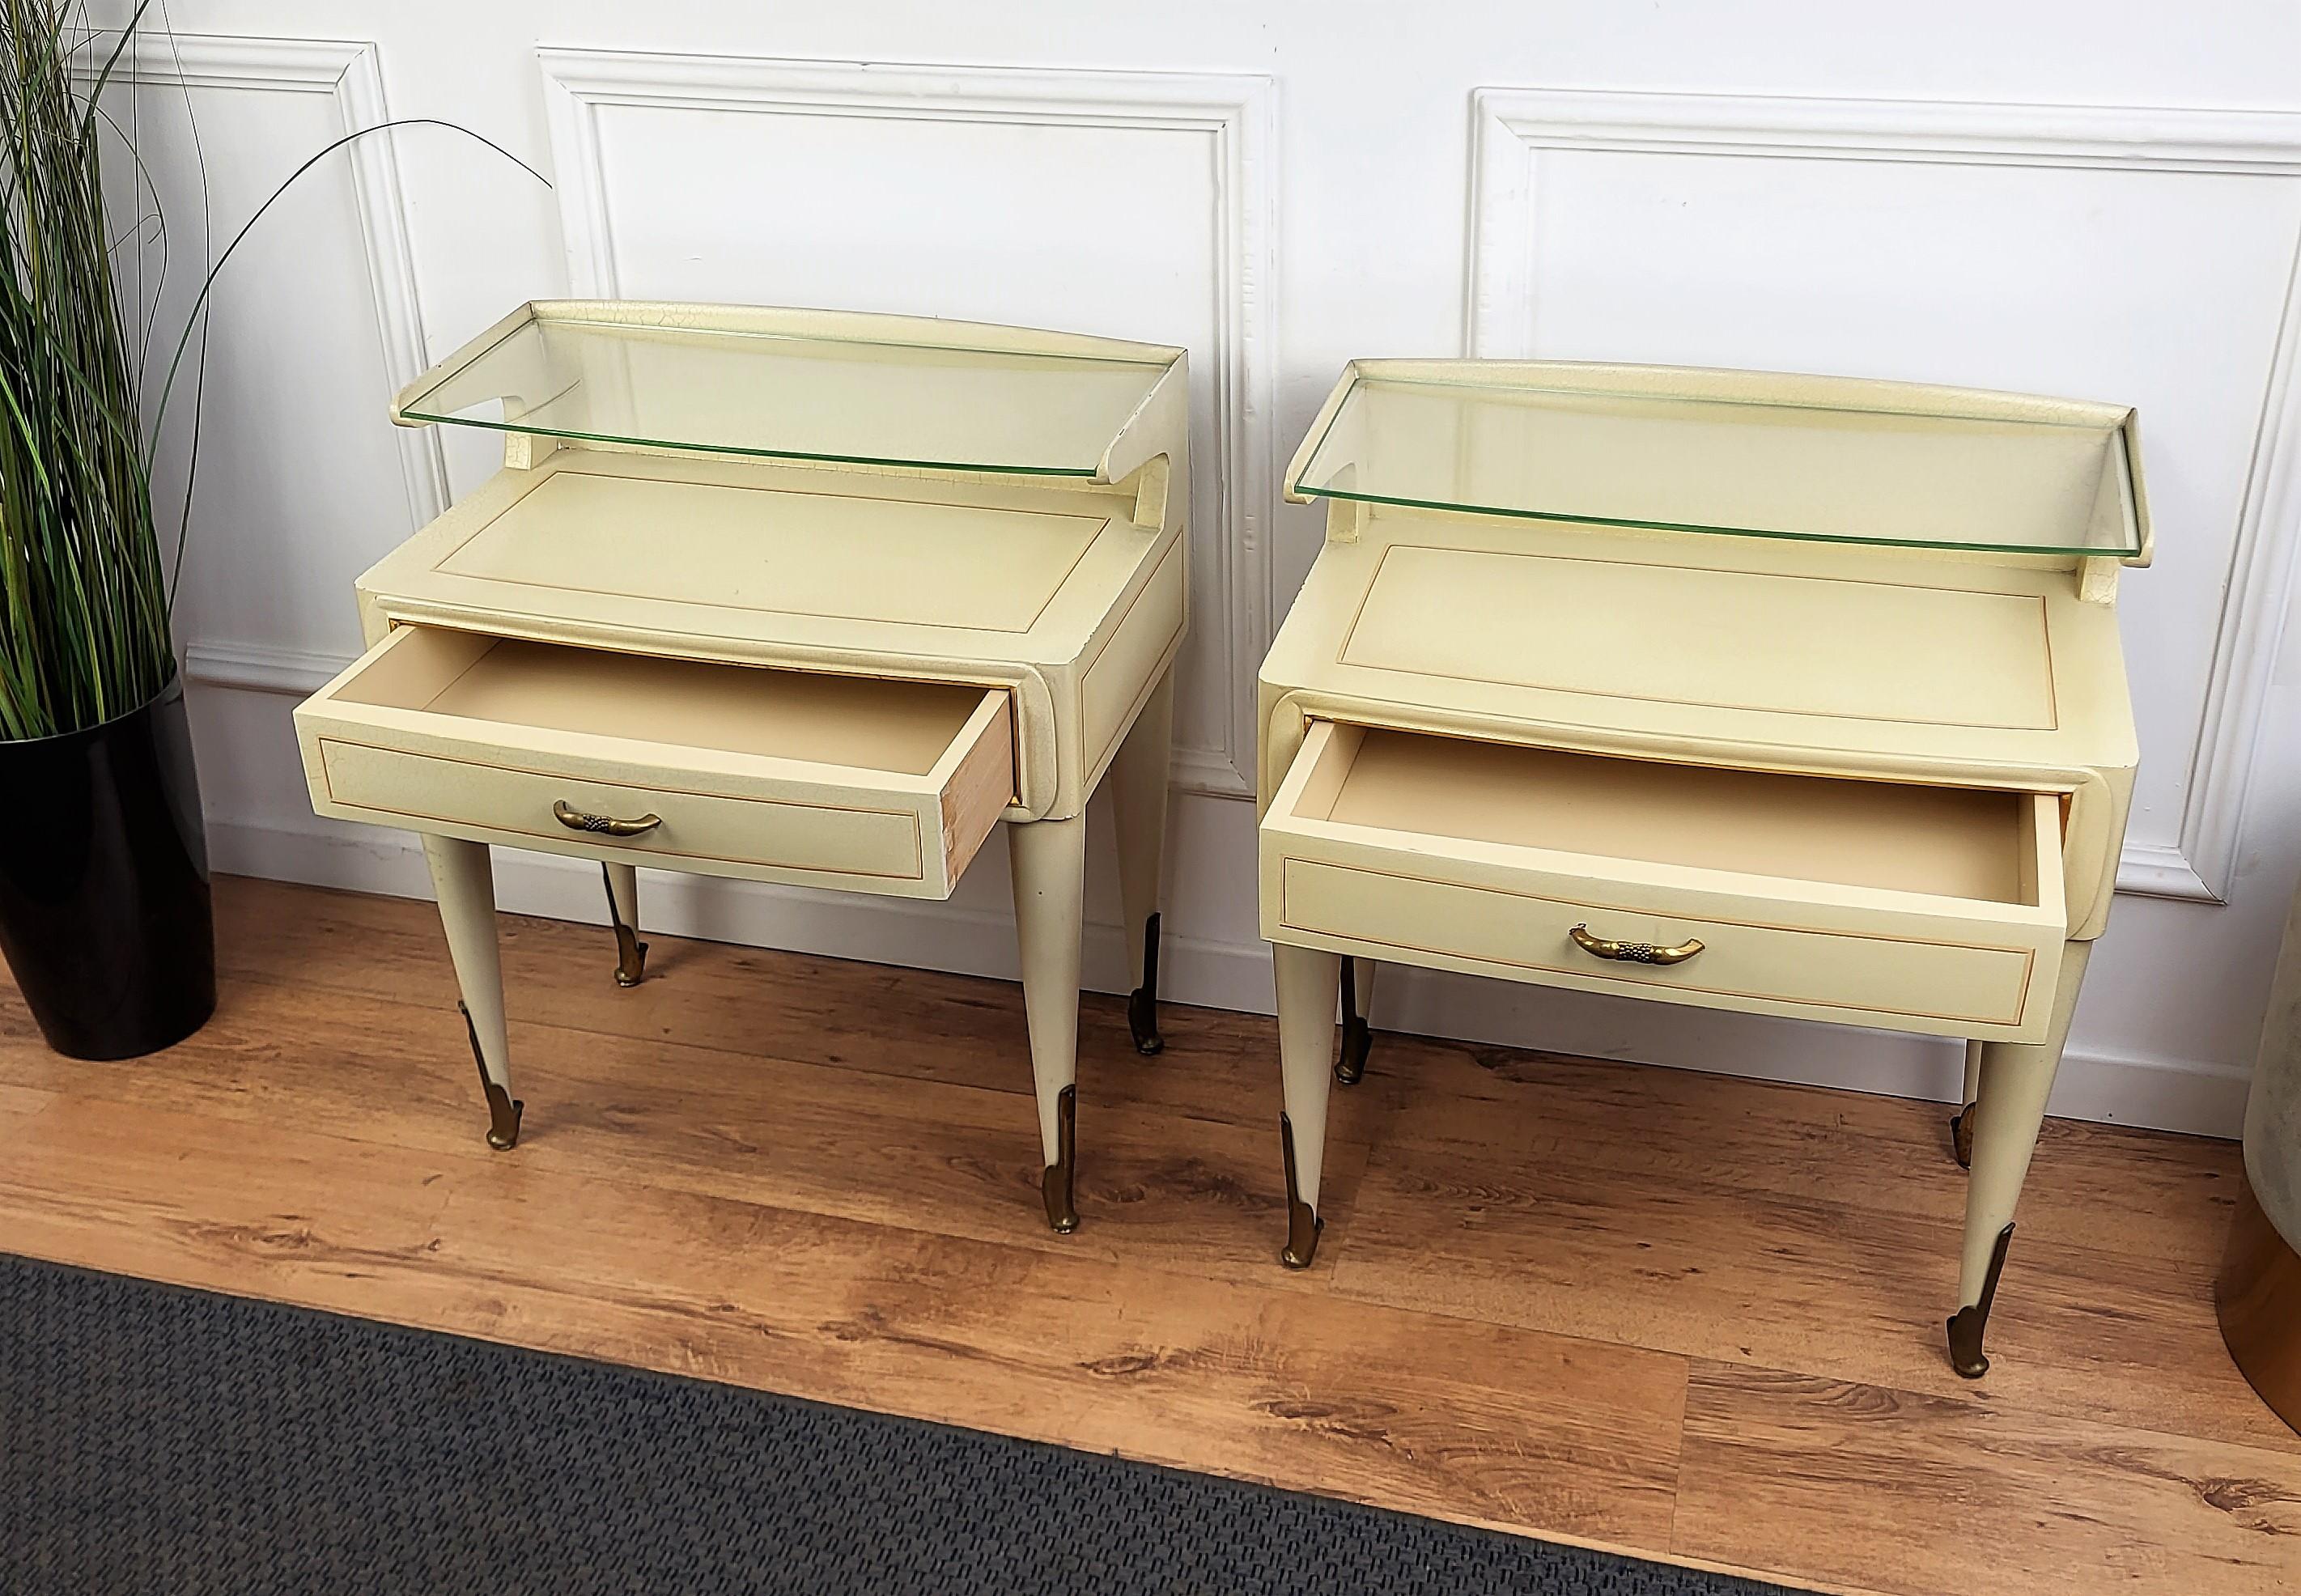 20th Century Italian Midcentury Art Deco Night Stands Bed Side Tables White Wood Brass Glass For Sale